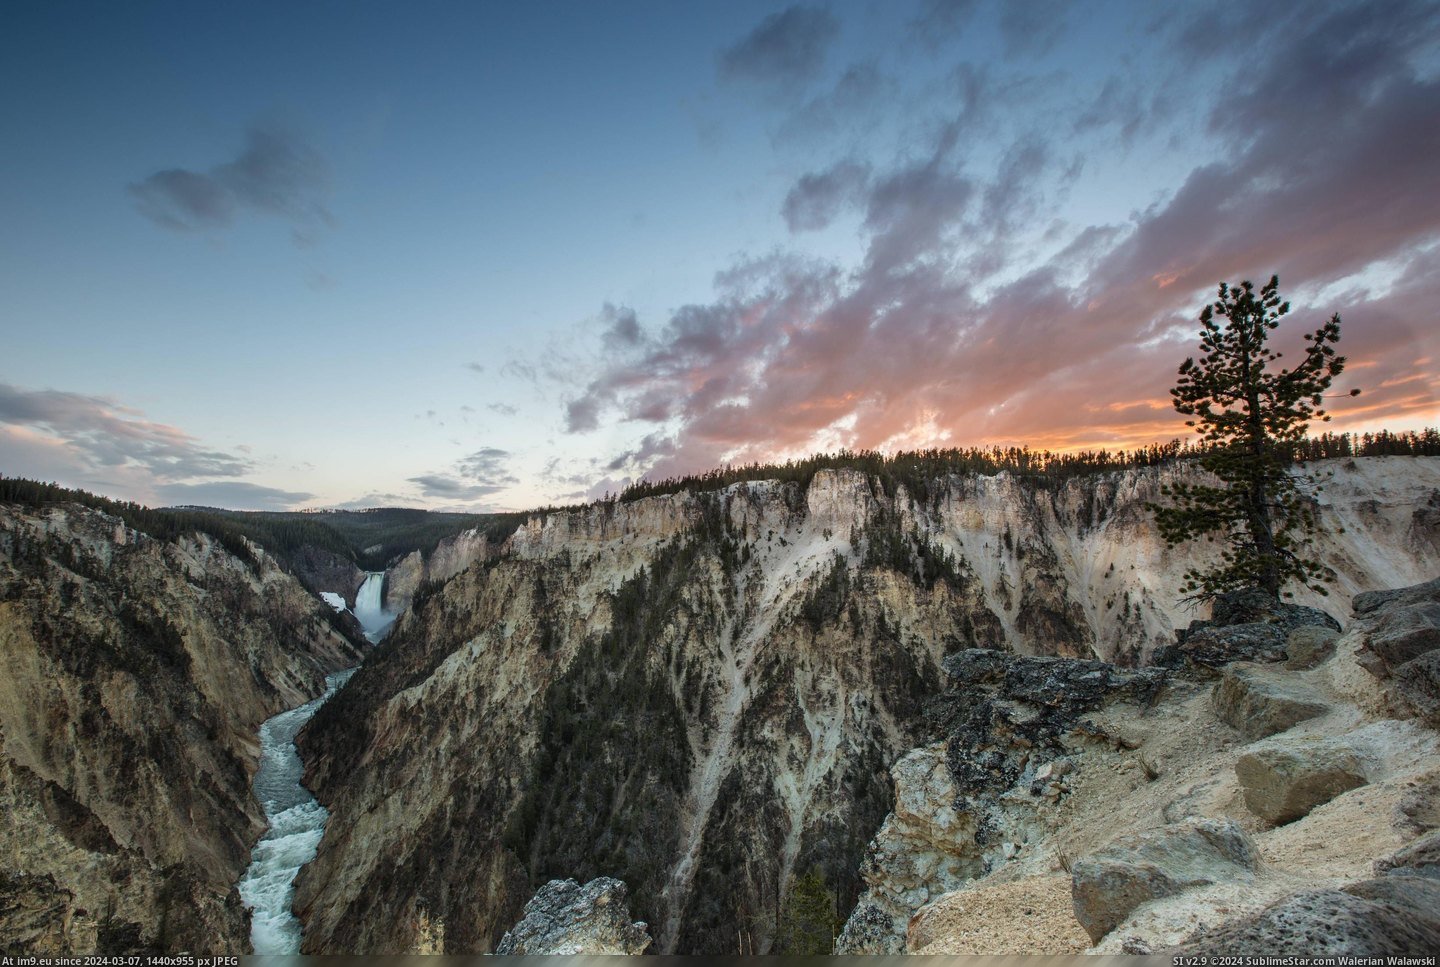 #Sunset #Canyon #5472x3648 #Grand #Yellowstone [Earthporn] Sunset over Grand Canyon of Yellowstone [5472x3648] [OC] Pic. (Изображение из альбом My r/EARTHPORN favs))